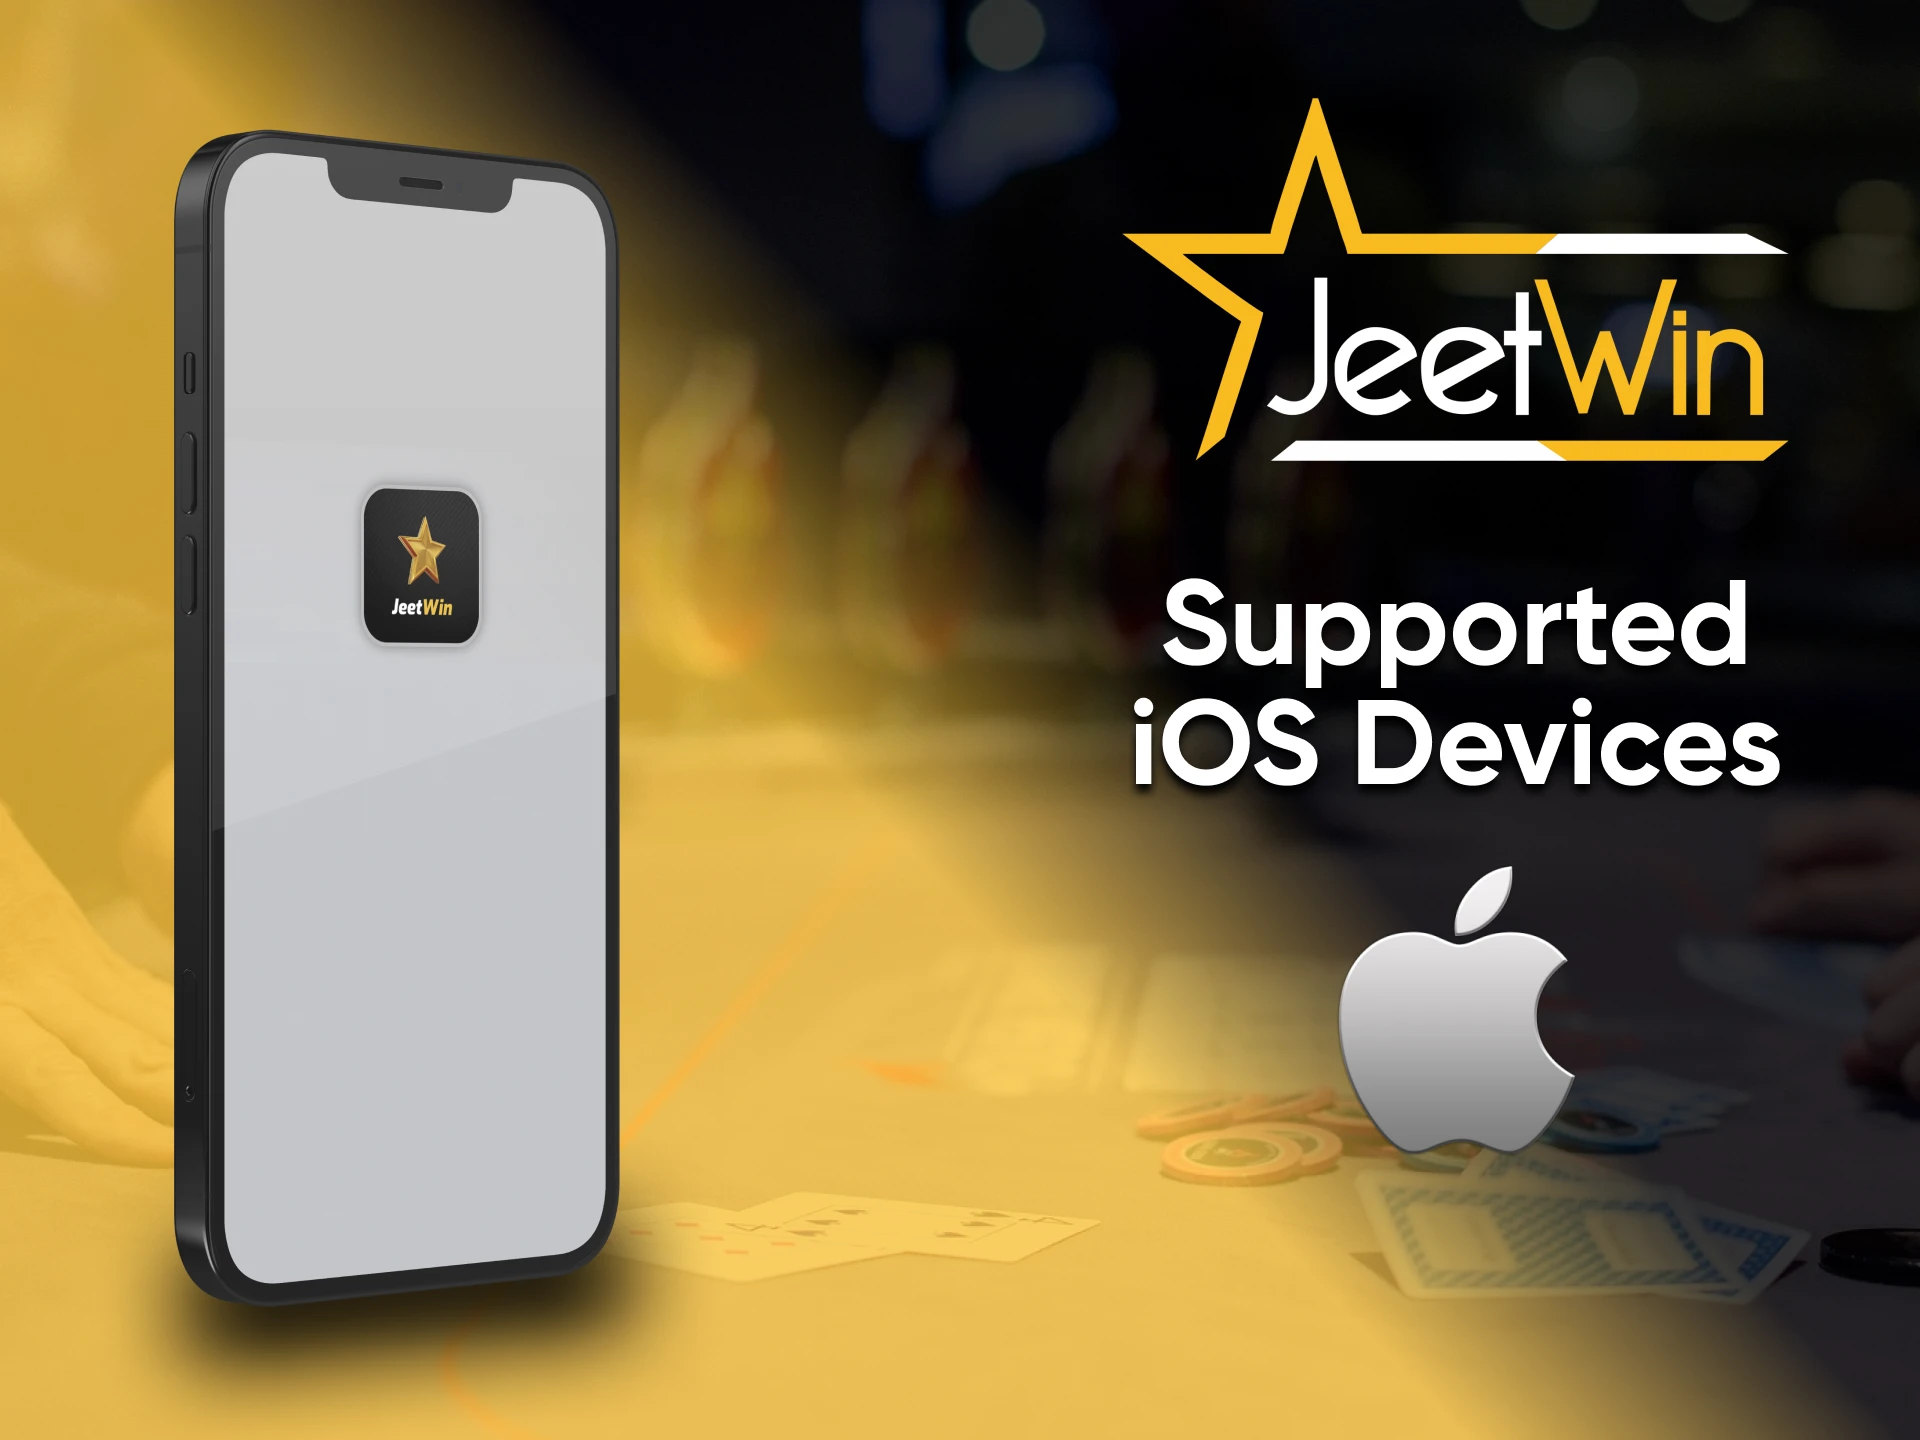 Use the Jeetwin casino app on your device.